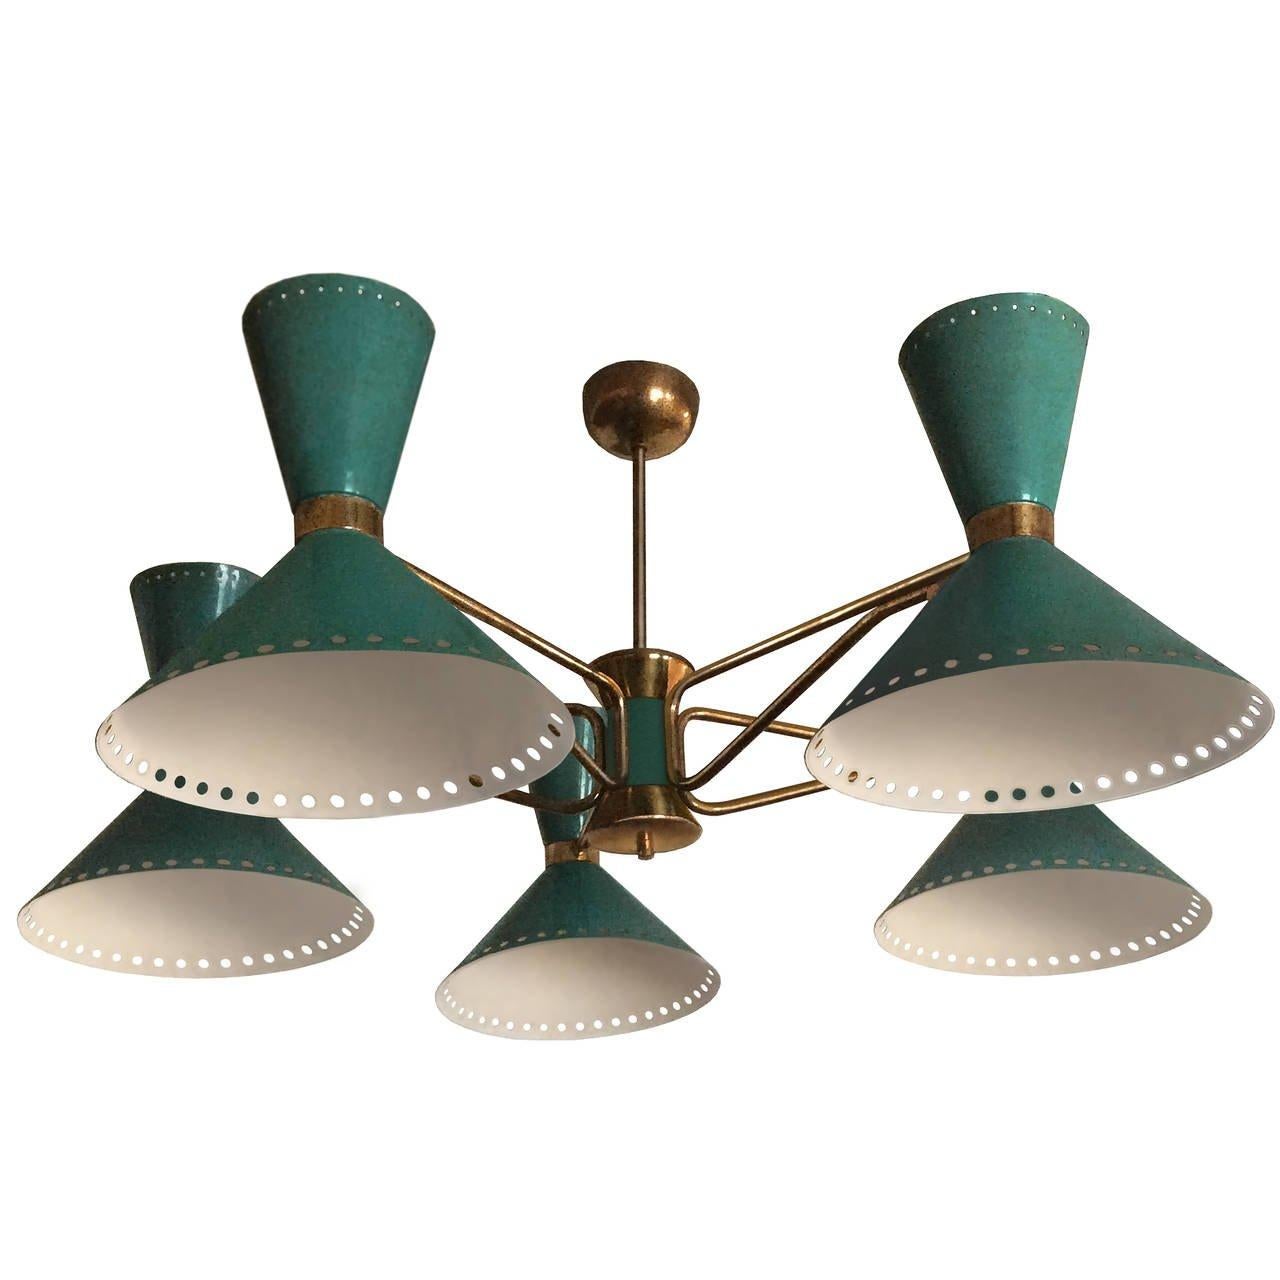 A brass five-arm chandelier with green enameled shades with perforated hole detail.

French, Circa 1950's